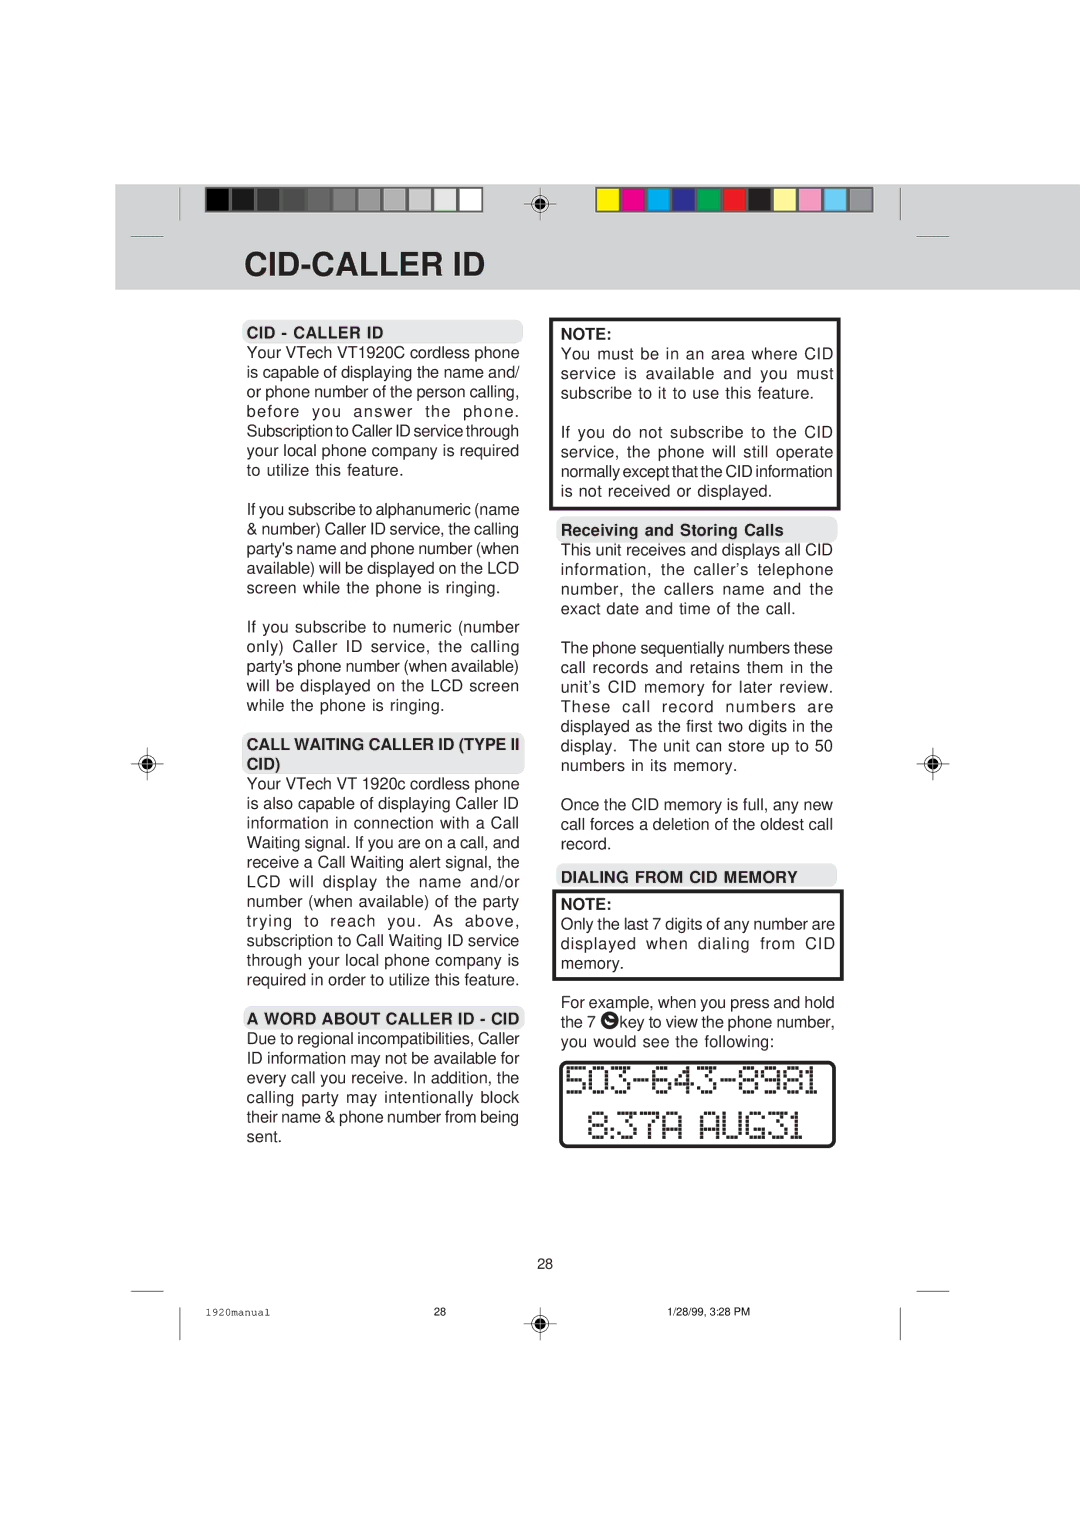 VTech VT 1920C Cid-Caller Id, Call Waiting Caller ID Type II CID, Receiving and Storing Calls, Dialing from CID Memory 